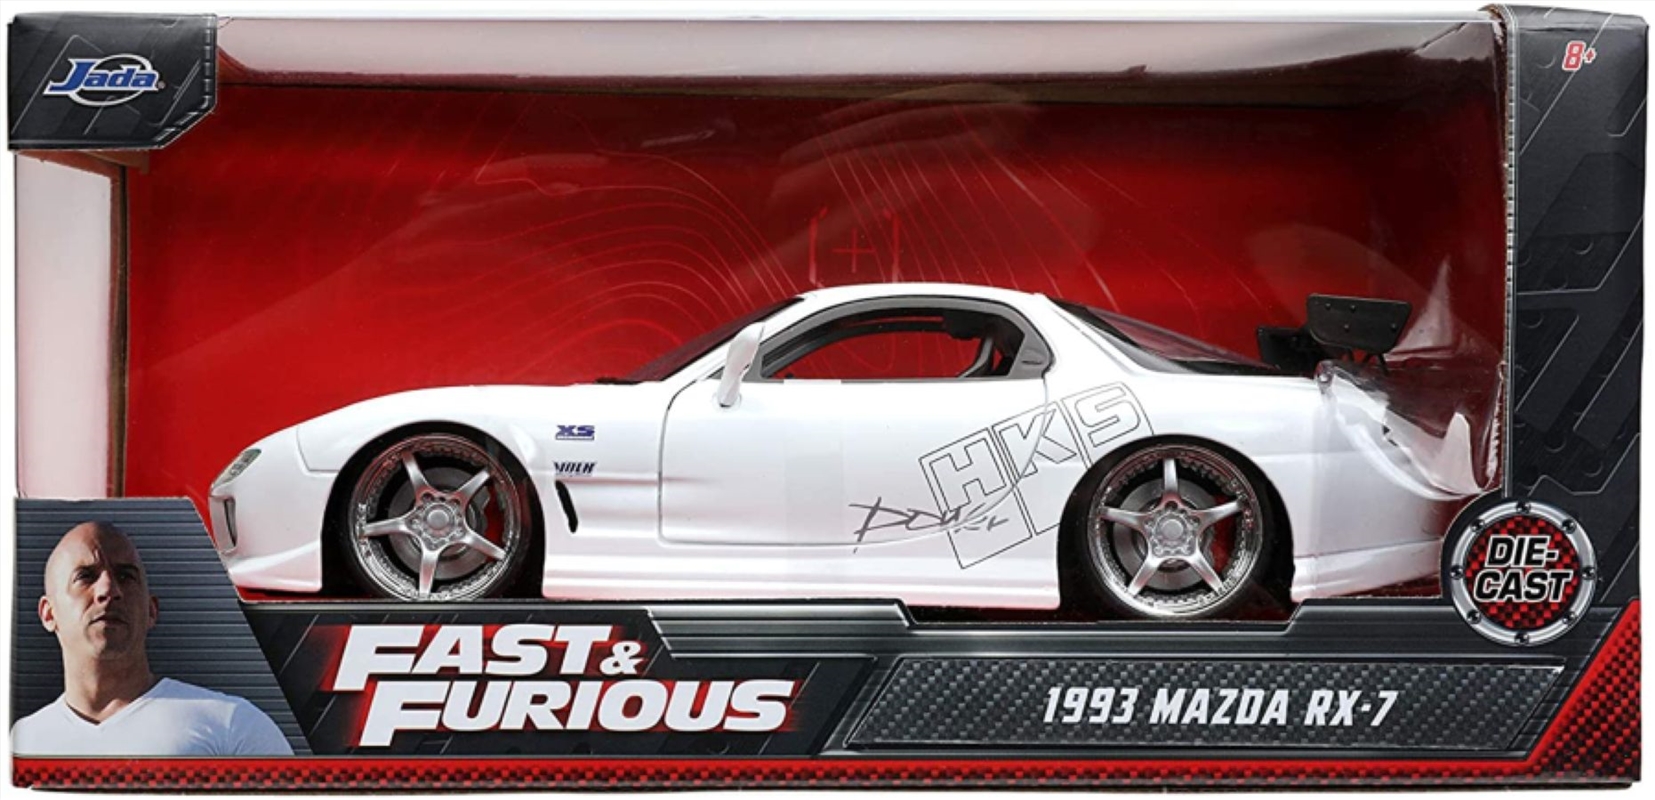 Fast and Furious - 1993 Mazda RX-7 FD3S-Wide 1:24 Scale Hollywood Ride/Product Detail/Figurines